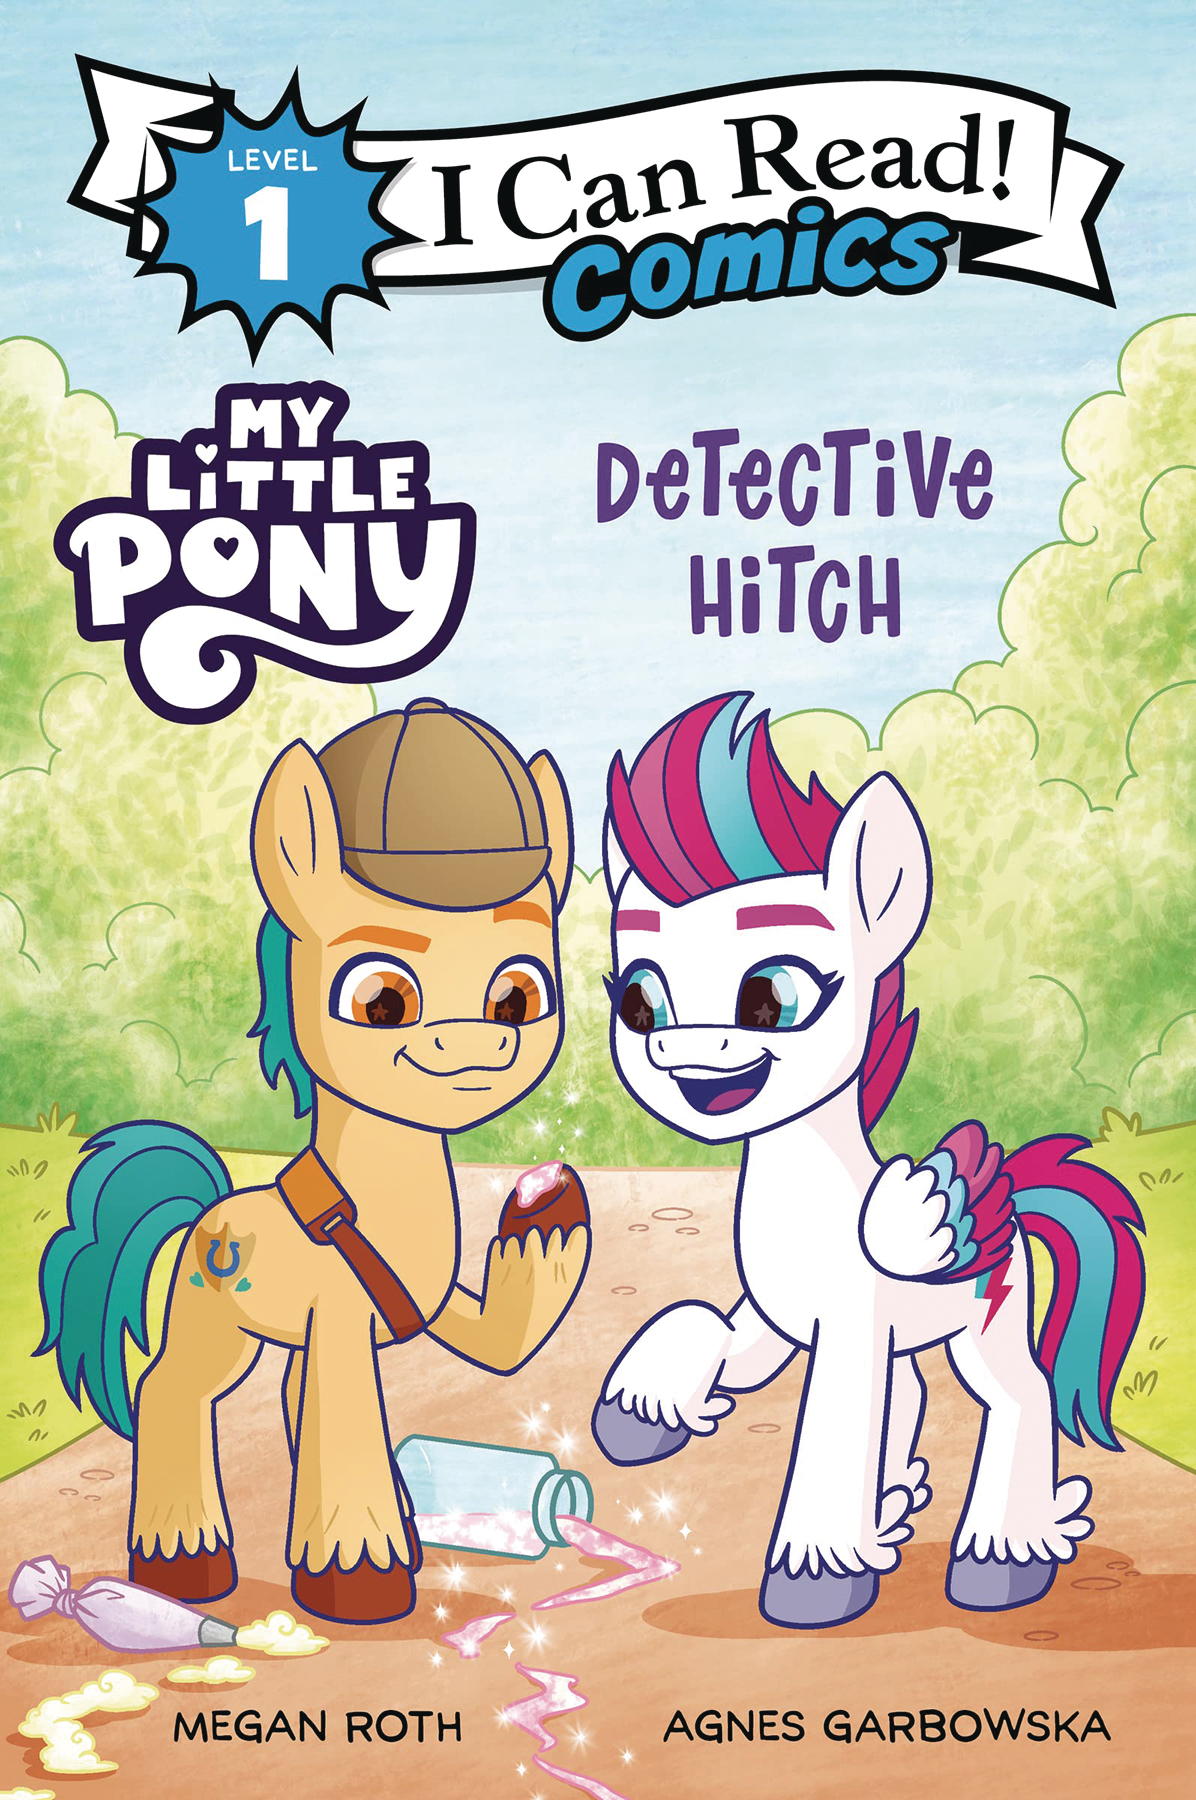 I Can Read Comics Graphic Novel Volume 13 My Little Pony Detective Hitch